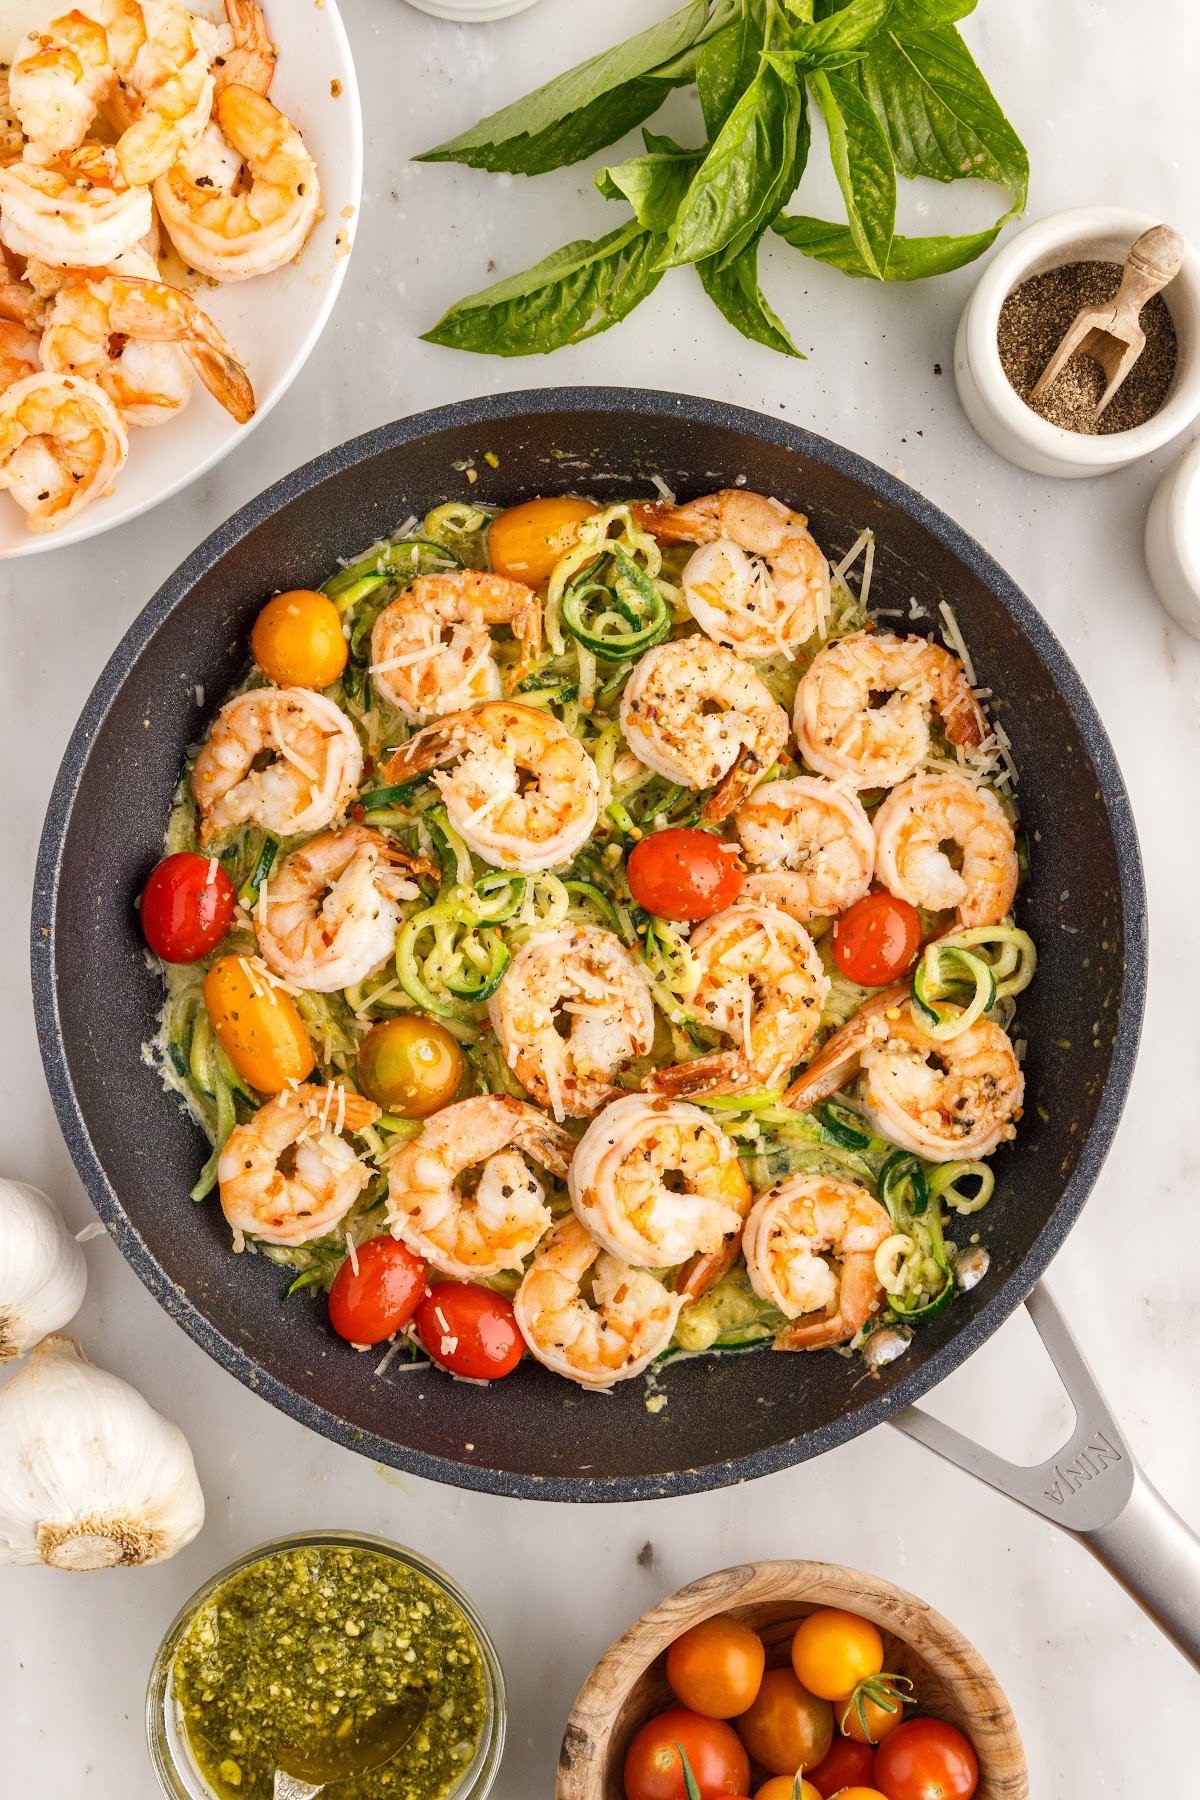 Pesto Zucchini Noodles with Shrimp in a skillet.